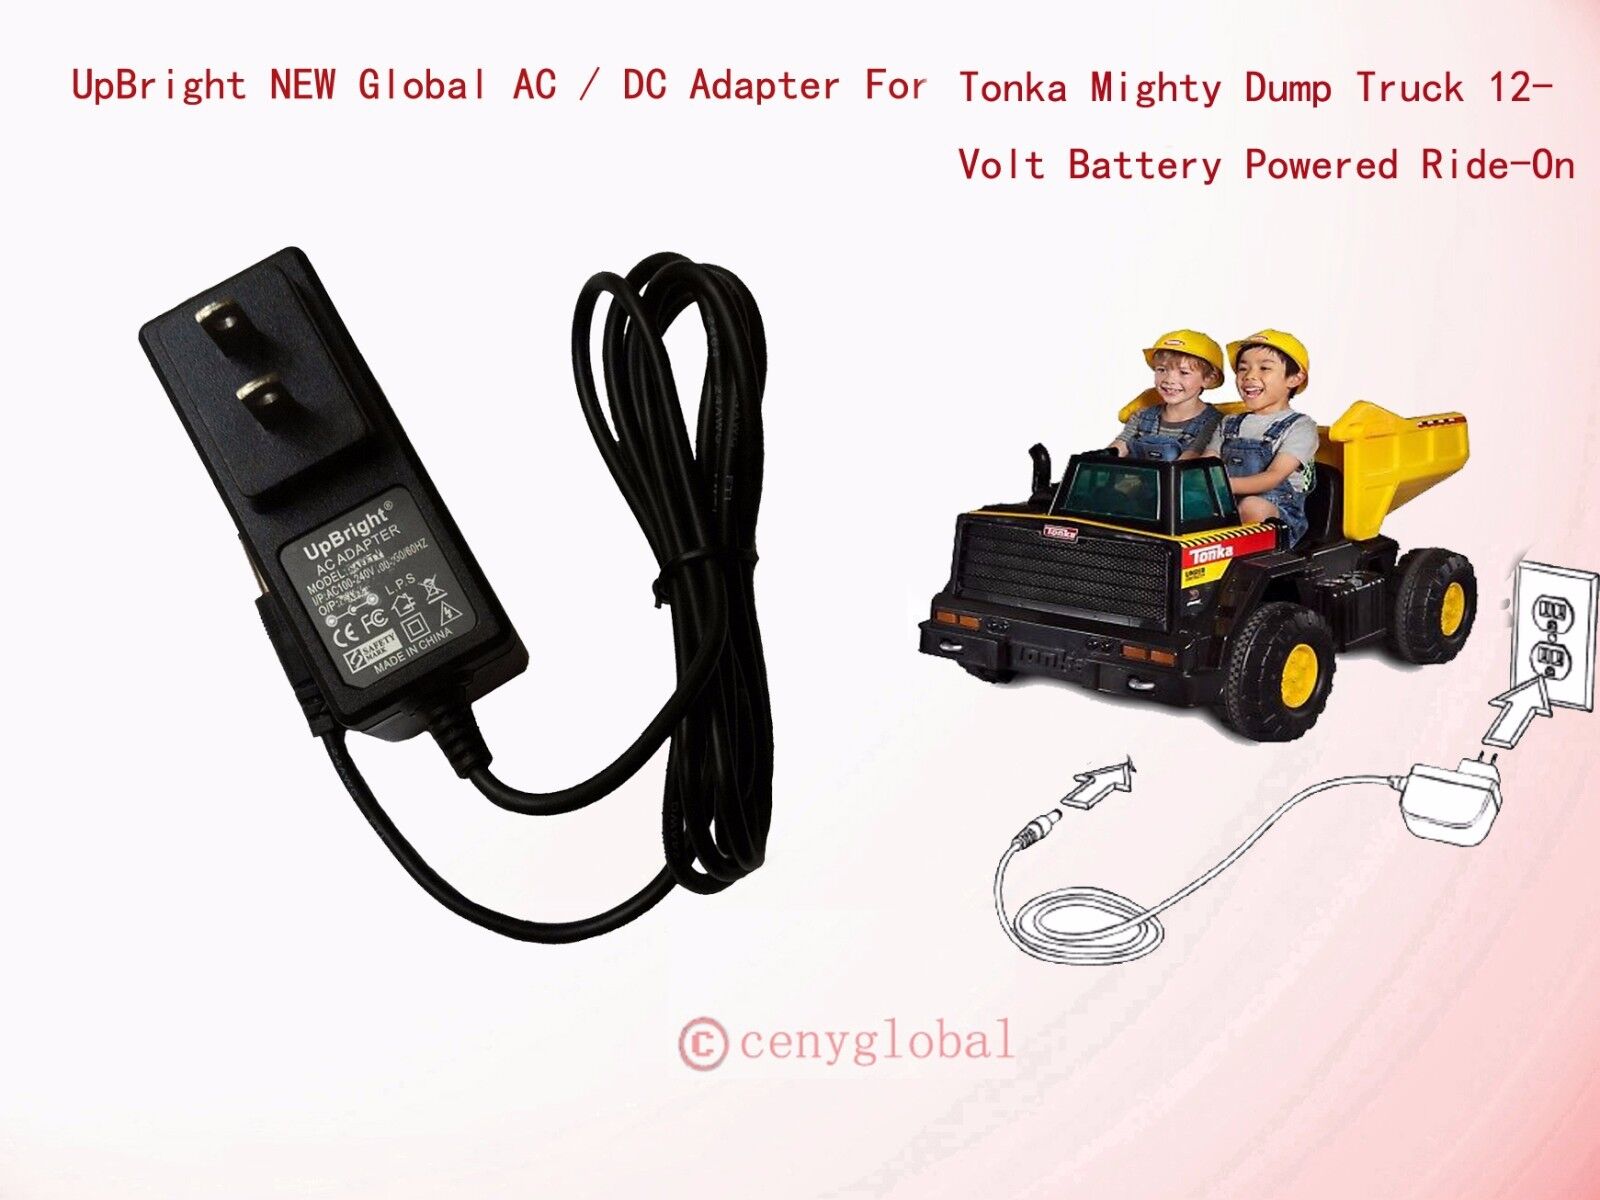 AC Adapter For Tonka Mighty Dump Truck 12-Volt Battery Powered Ride On Charger